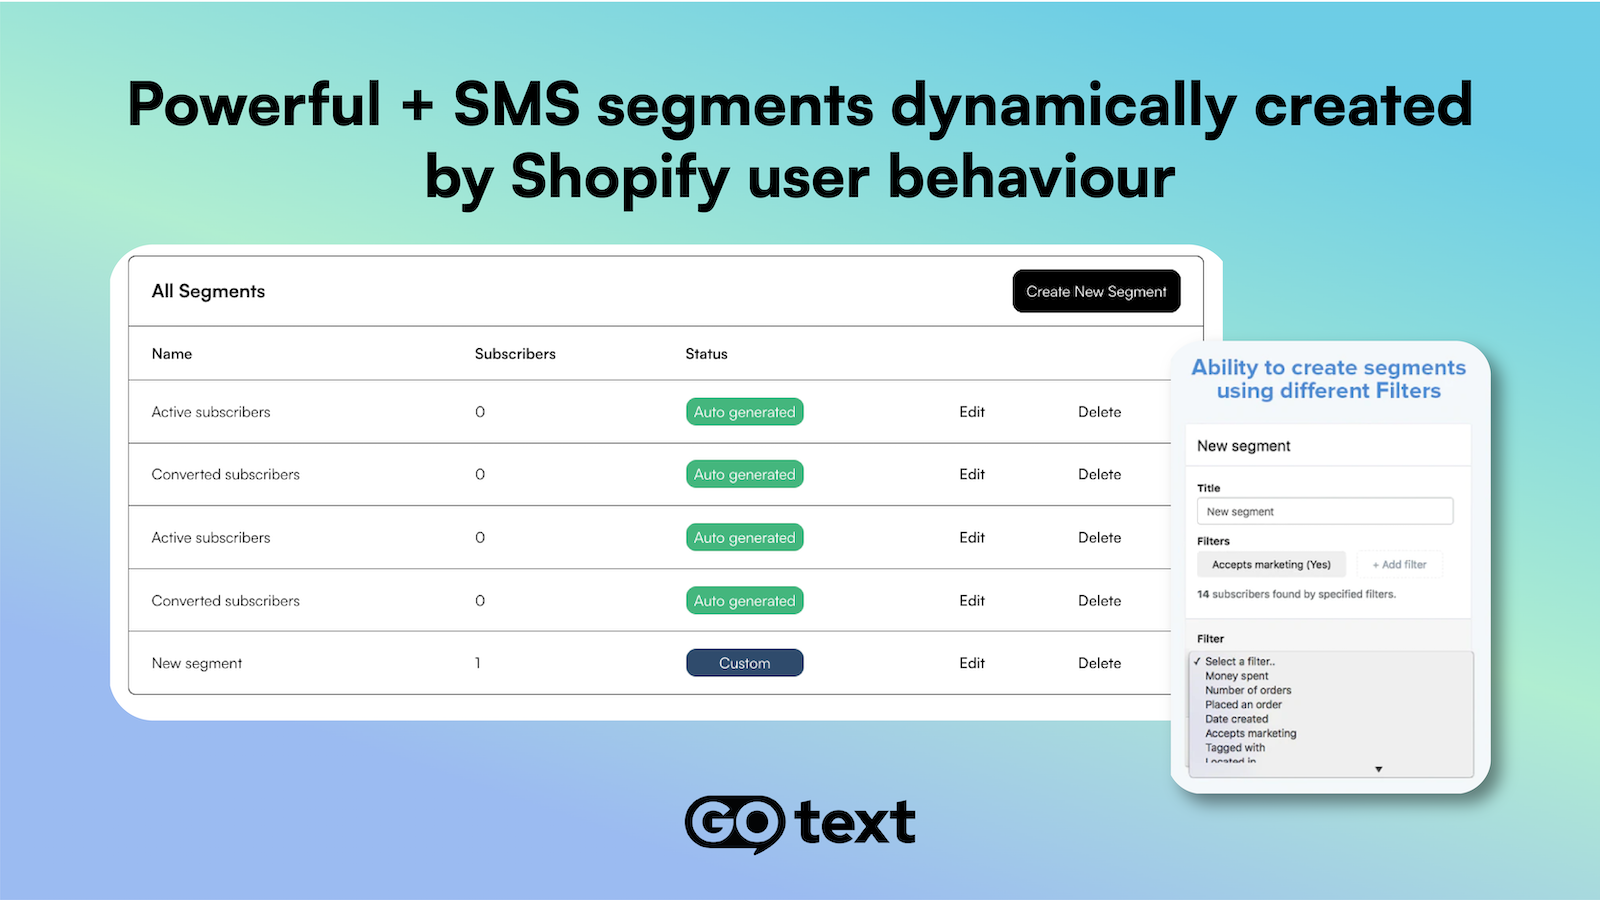 SMS Campaigns Segmentation having different filters